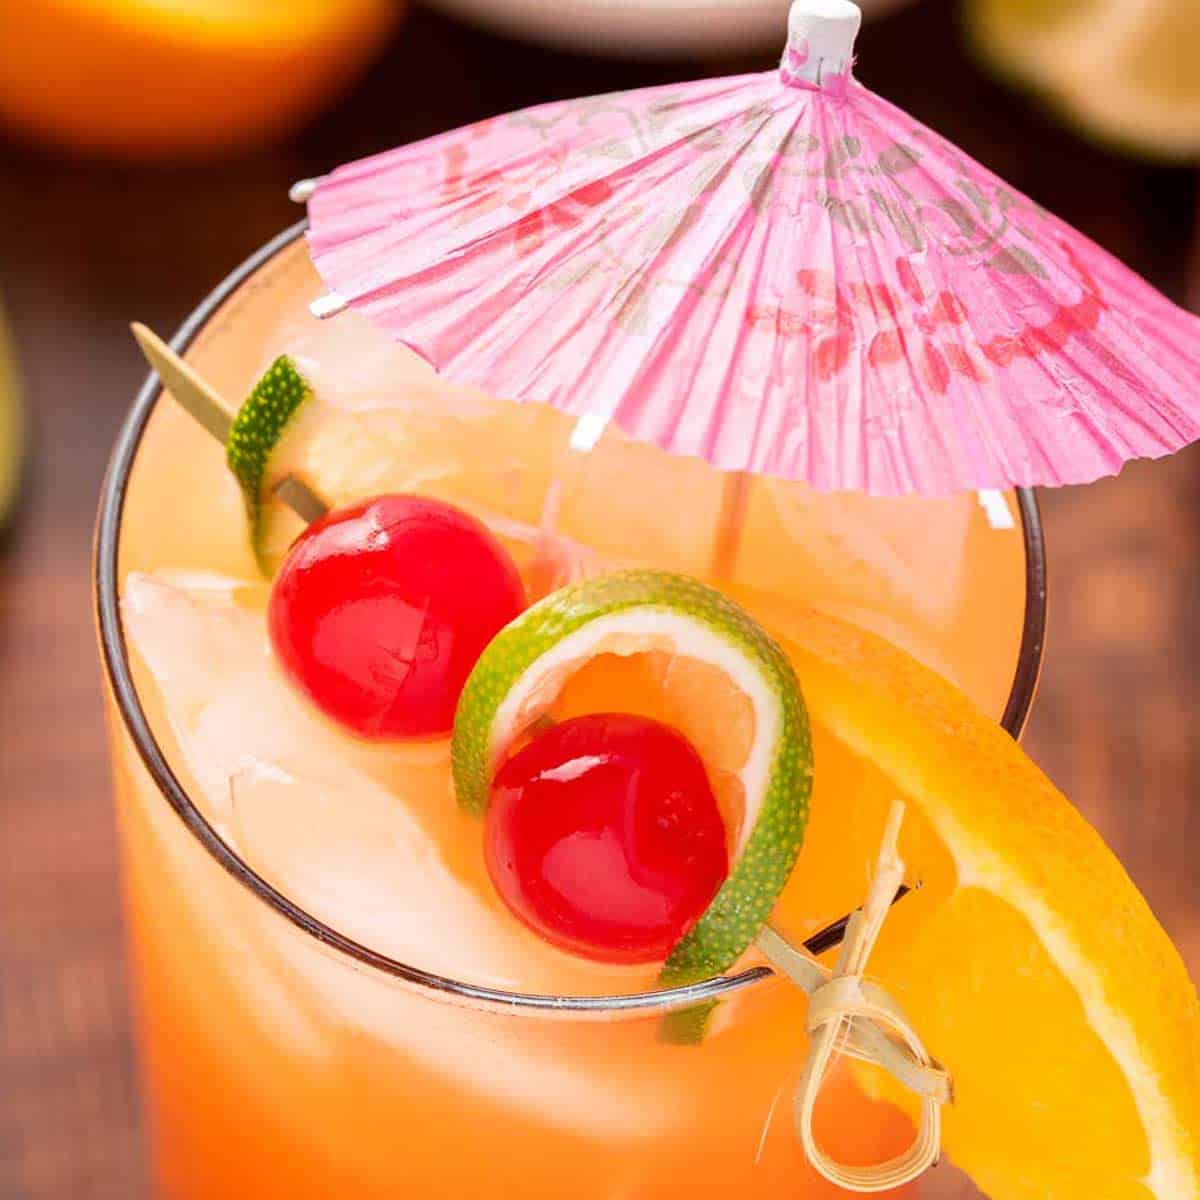 https://www.thechunkychef.com/wp-content/uploads/2021/07/Tropical-Rum-Punch-recipe-card.jpg